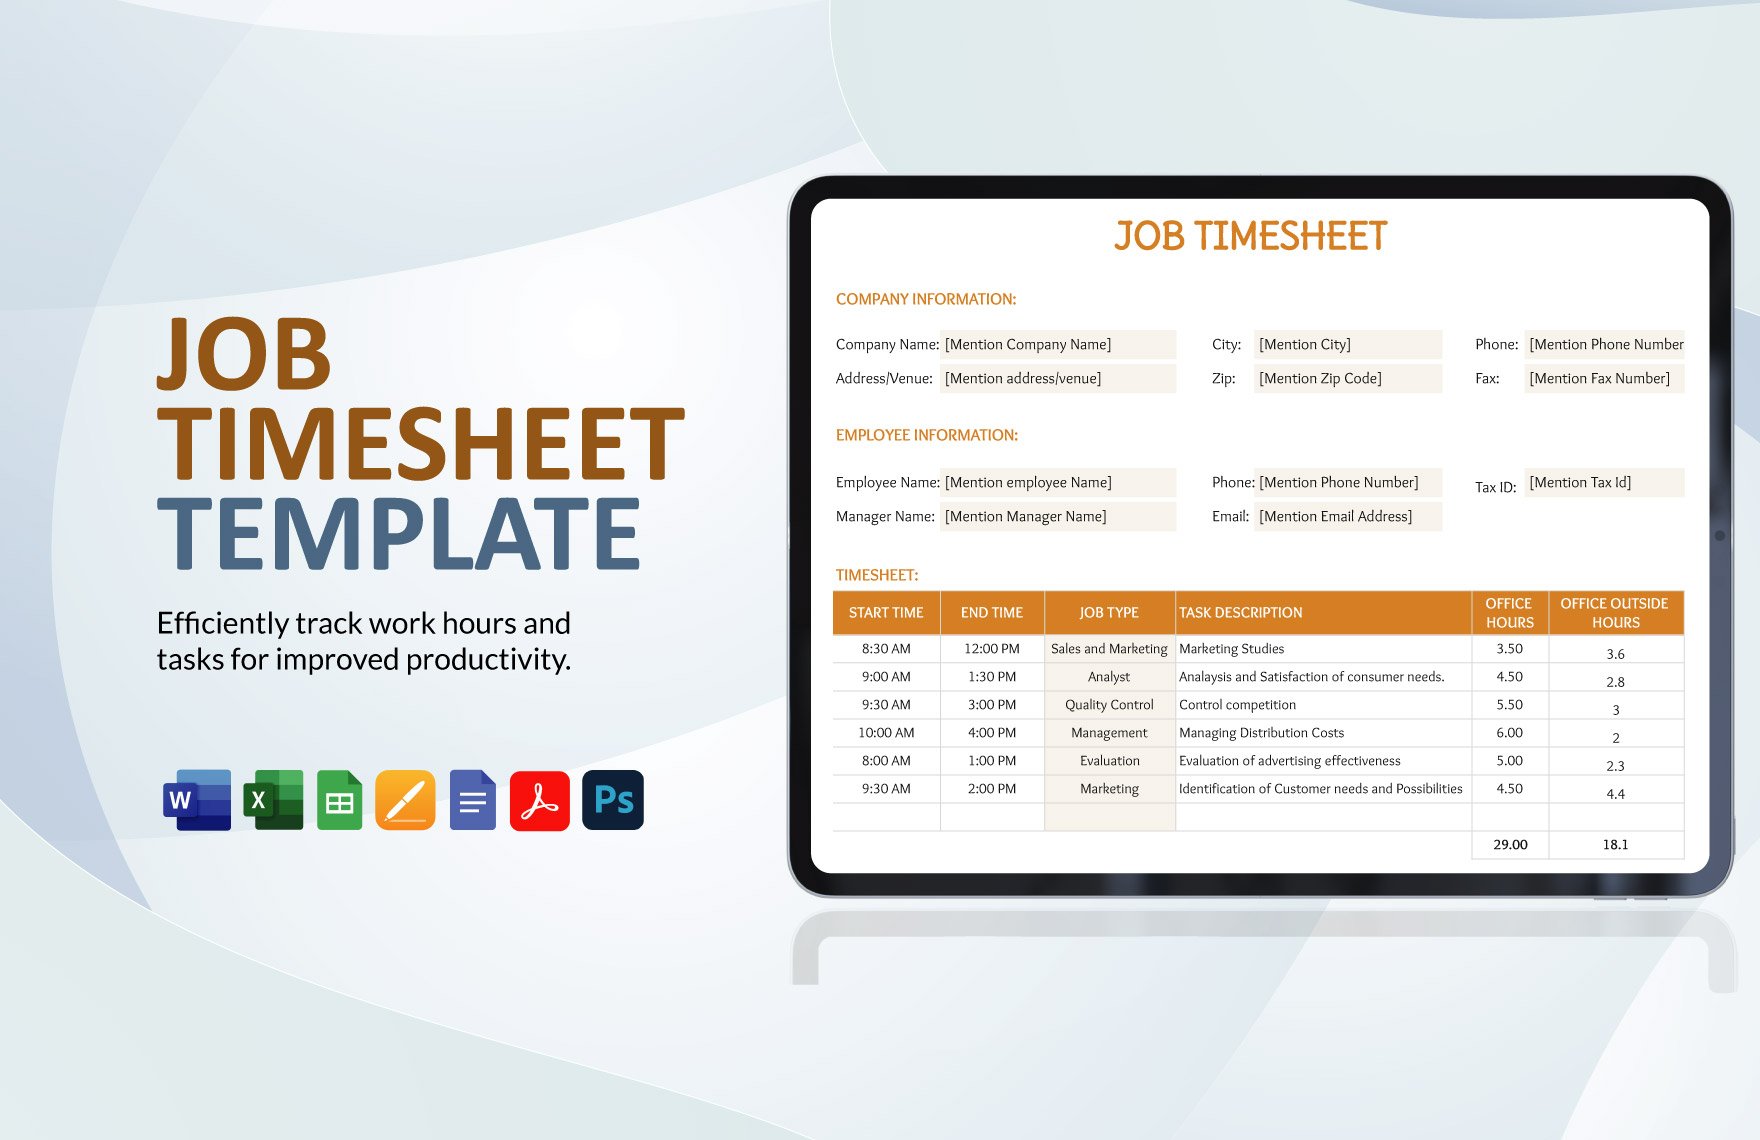 Job Timesheet Template in Word, Google Docs, Excel, PDF, Google Sheets, PSD, Apple Pages